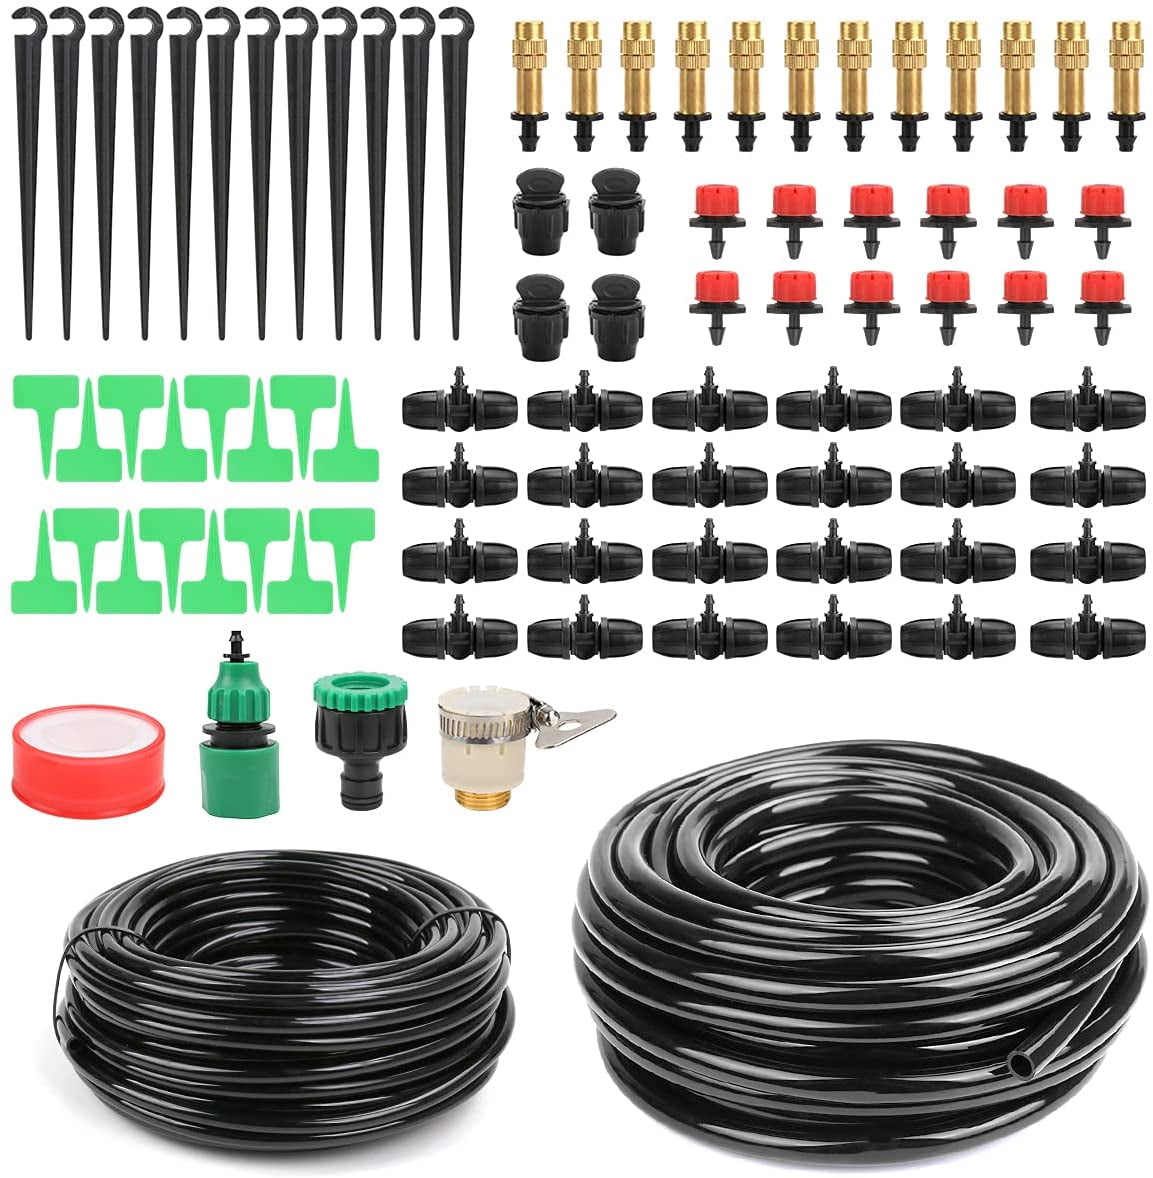 OUTFANDIA 3/8 Irrigation Tubing 50ft Heavy Duty Blank Distribution Tubing Watering Drip Automatic Irrigation Equipment Set for Garden Greenhouse,Flower,Patio,Lawn 